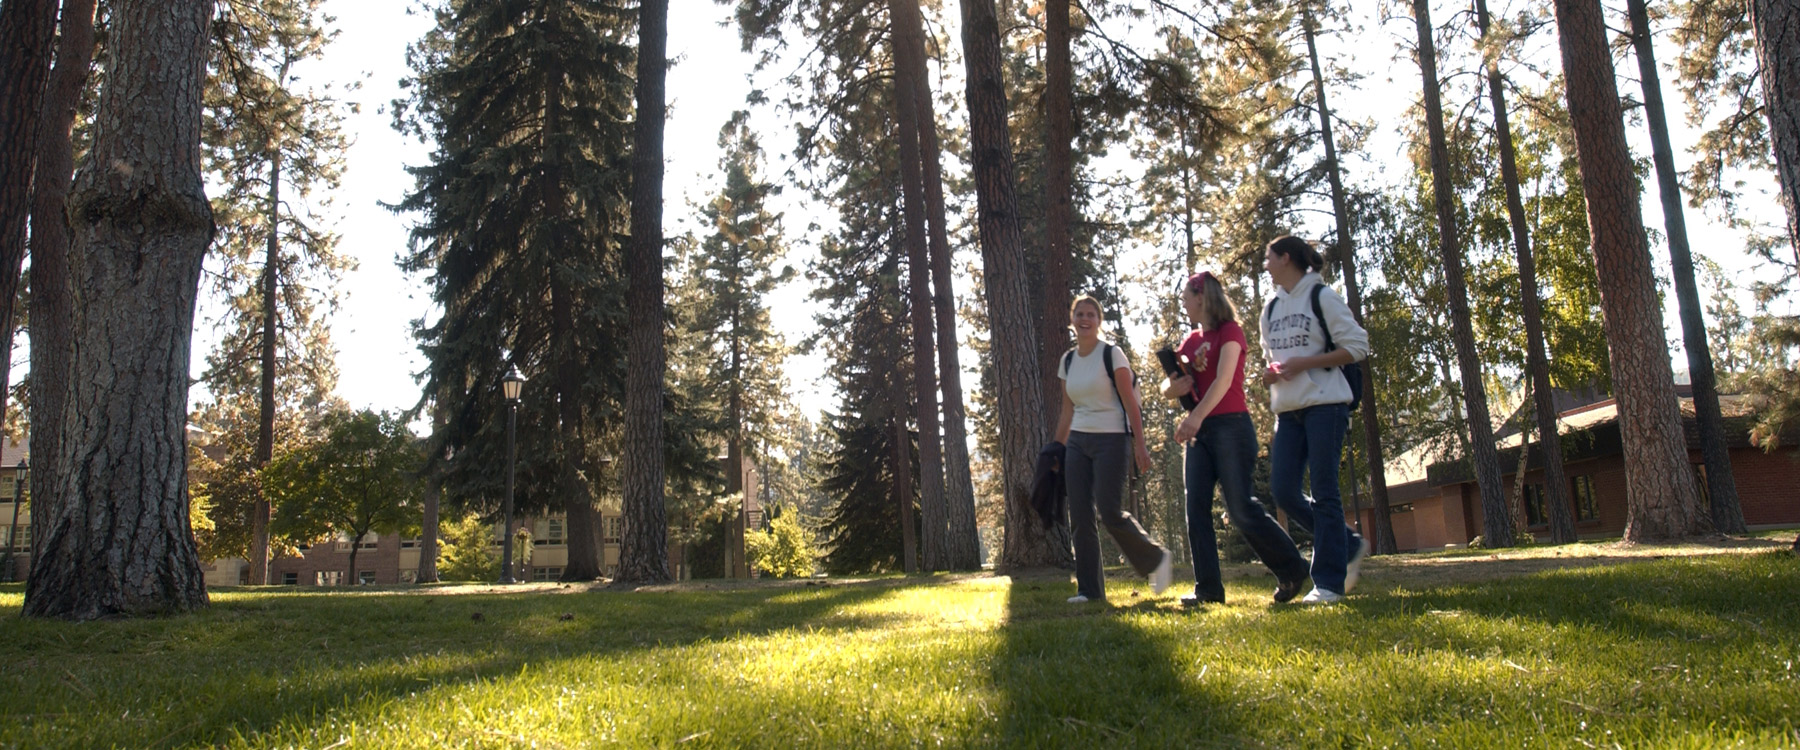 Three students walk across the grass in the middle of campus. Tall pine trees cast shadows across the grass.